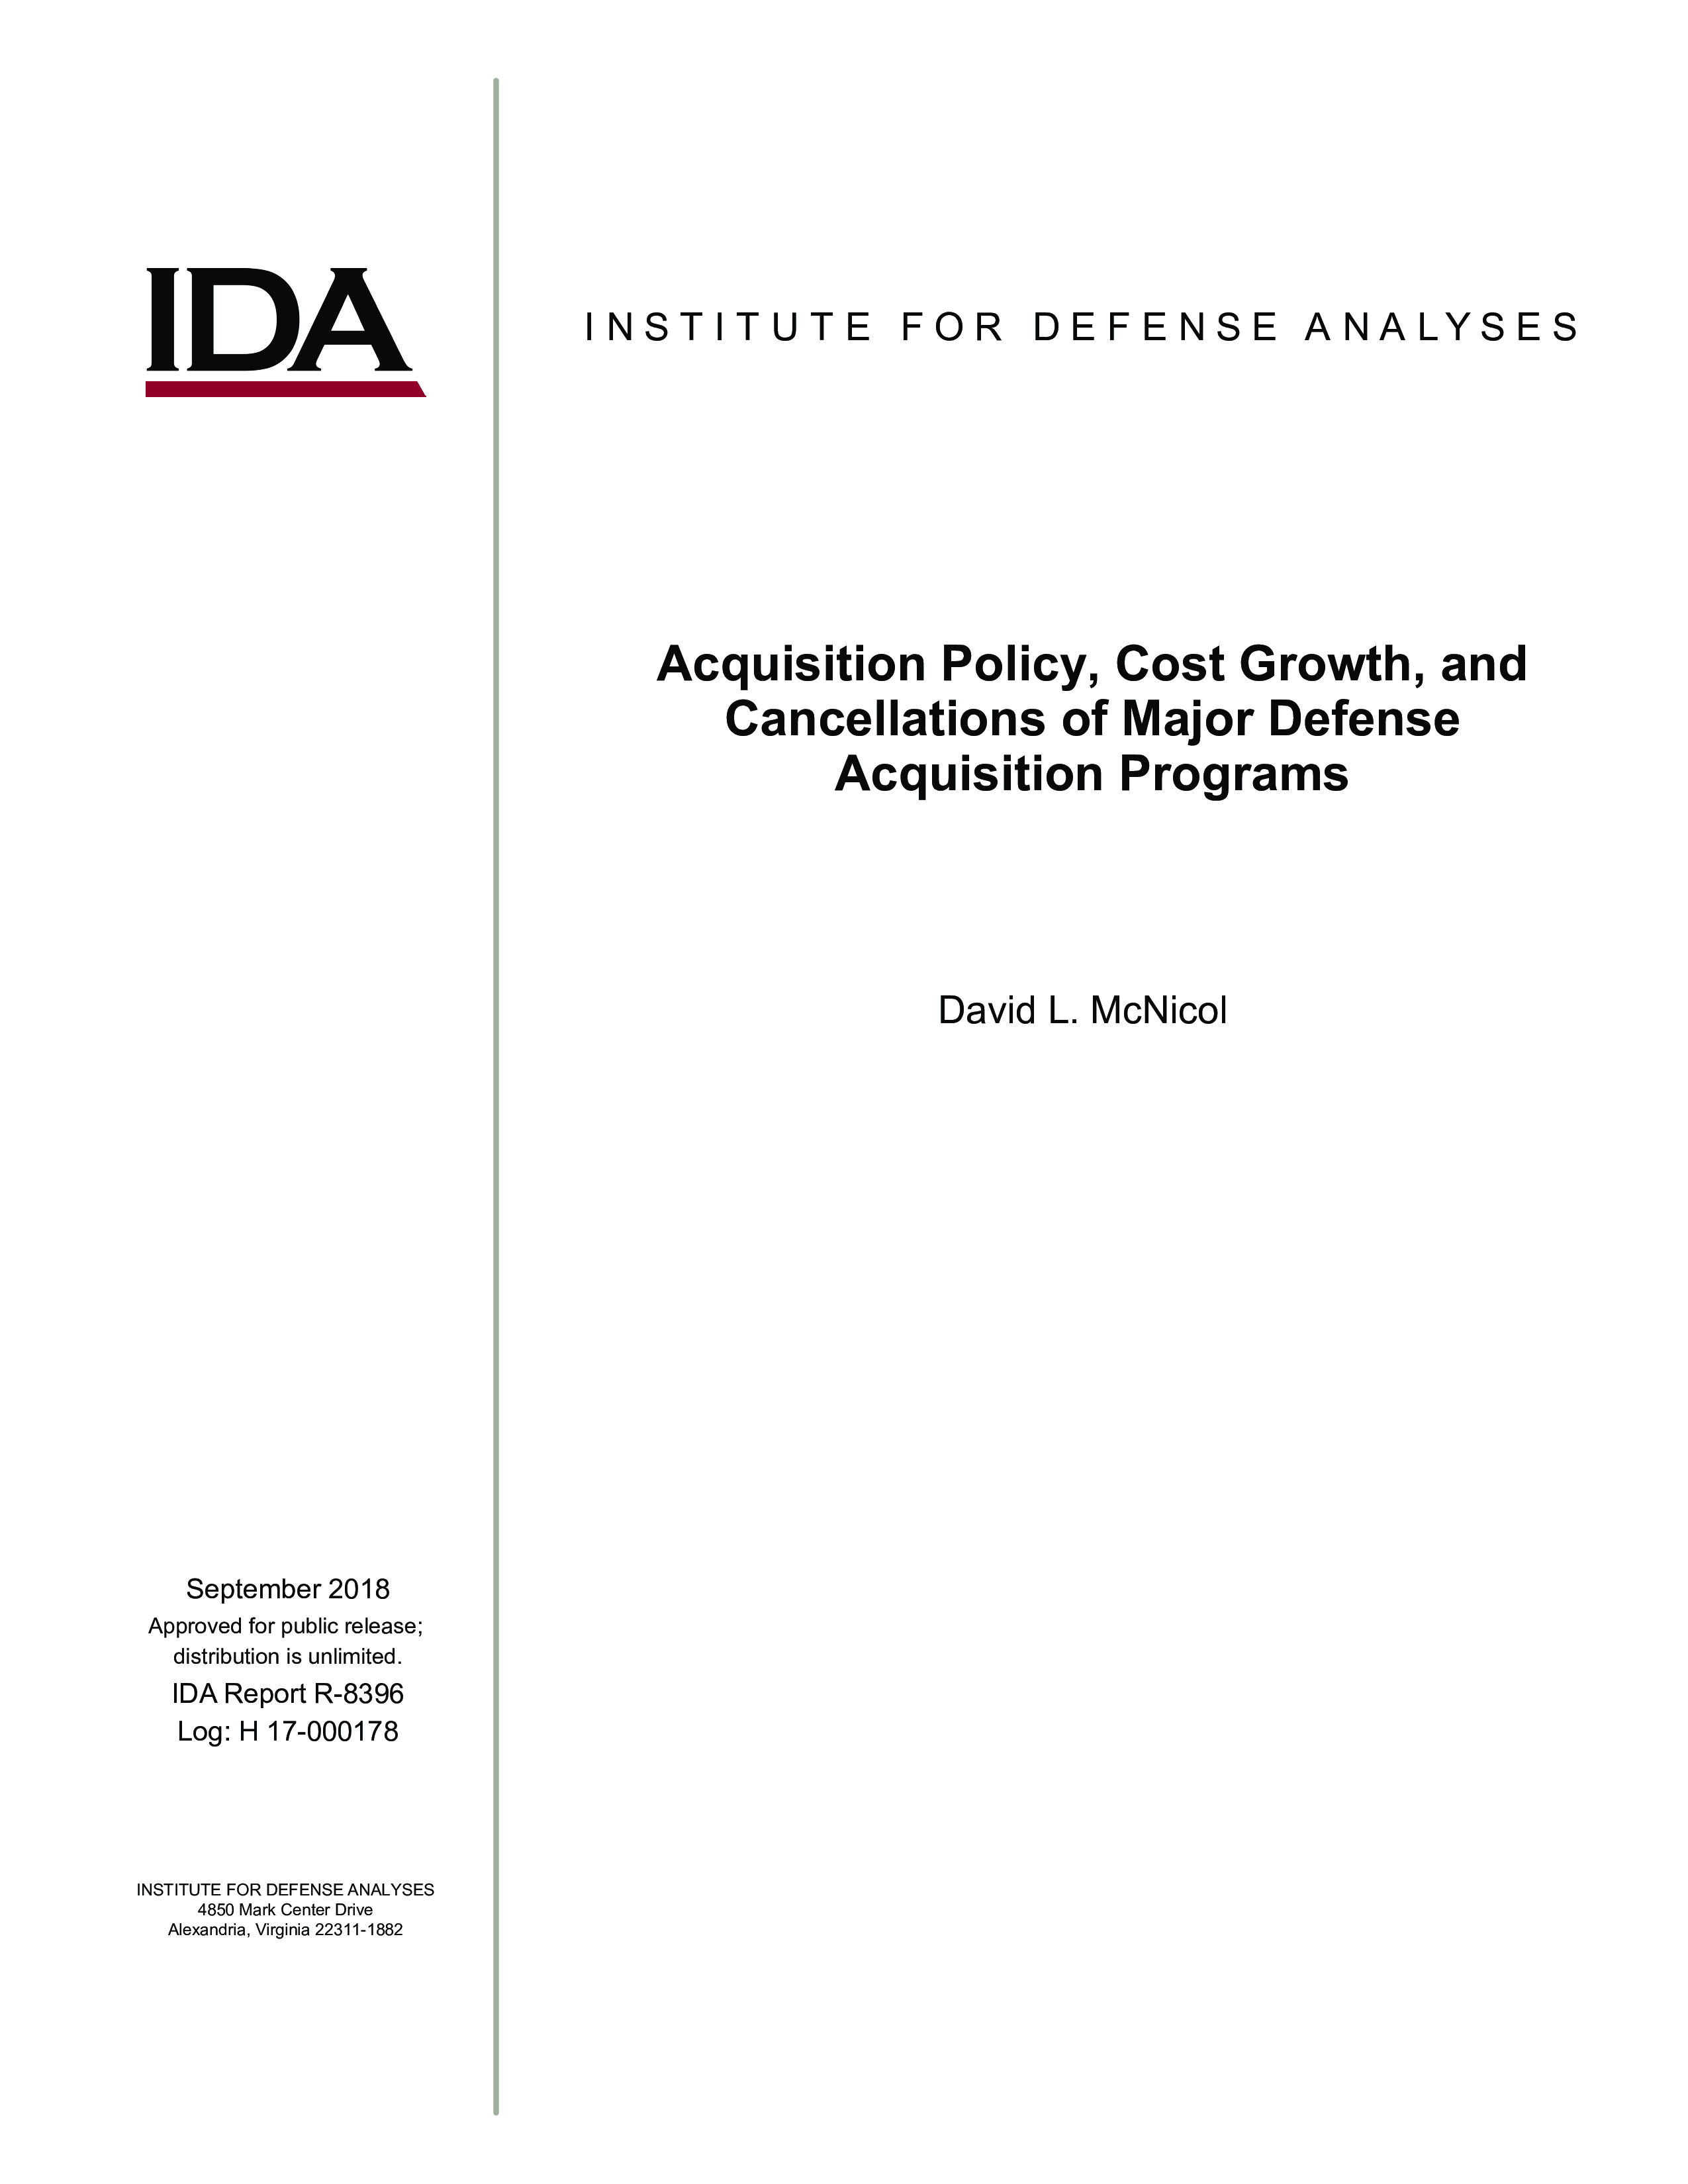 Acquisition Policy, Cost Growth, and Cancellations of Major Defense Acquisition Programs